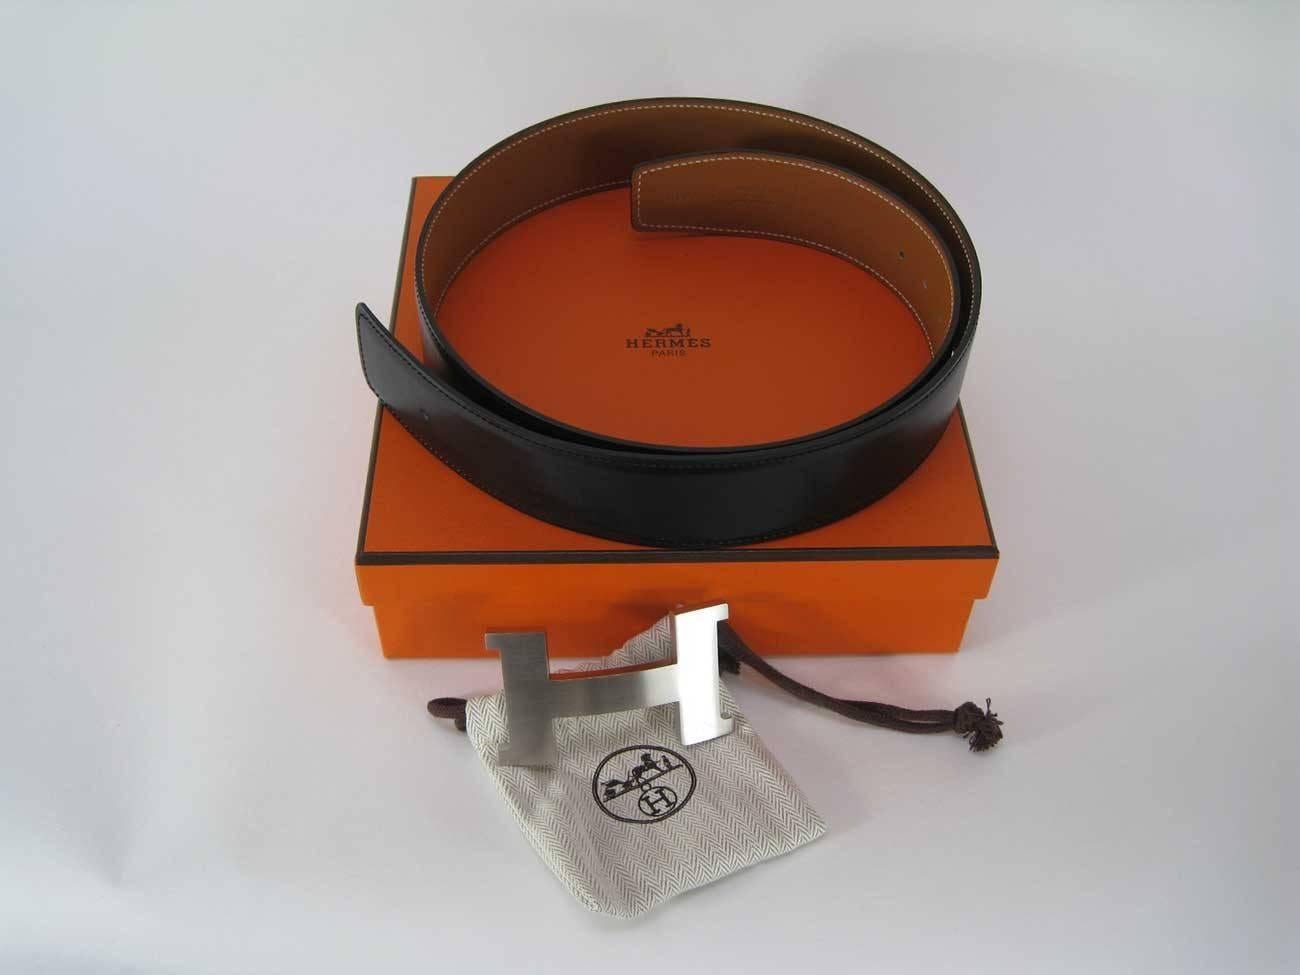 Fabulous Hermes reversible leather belt with H buckle.

Belt and buckle come in original box and packaging,

Brushed silver buckle.

Black and light brown/tan leather with three holes for adjustable size.

This item is in good pre-worn condition but